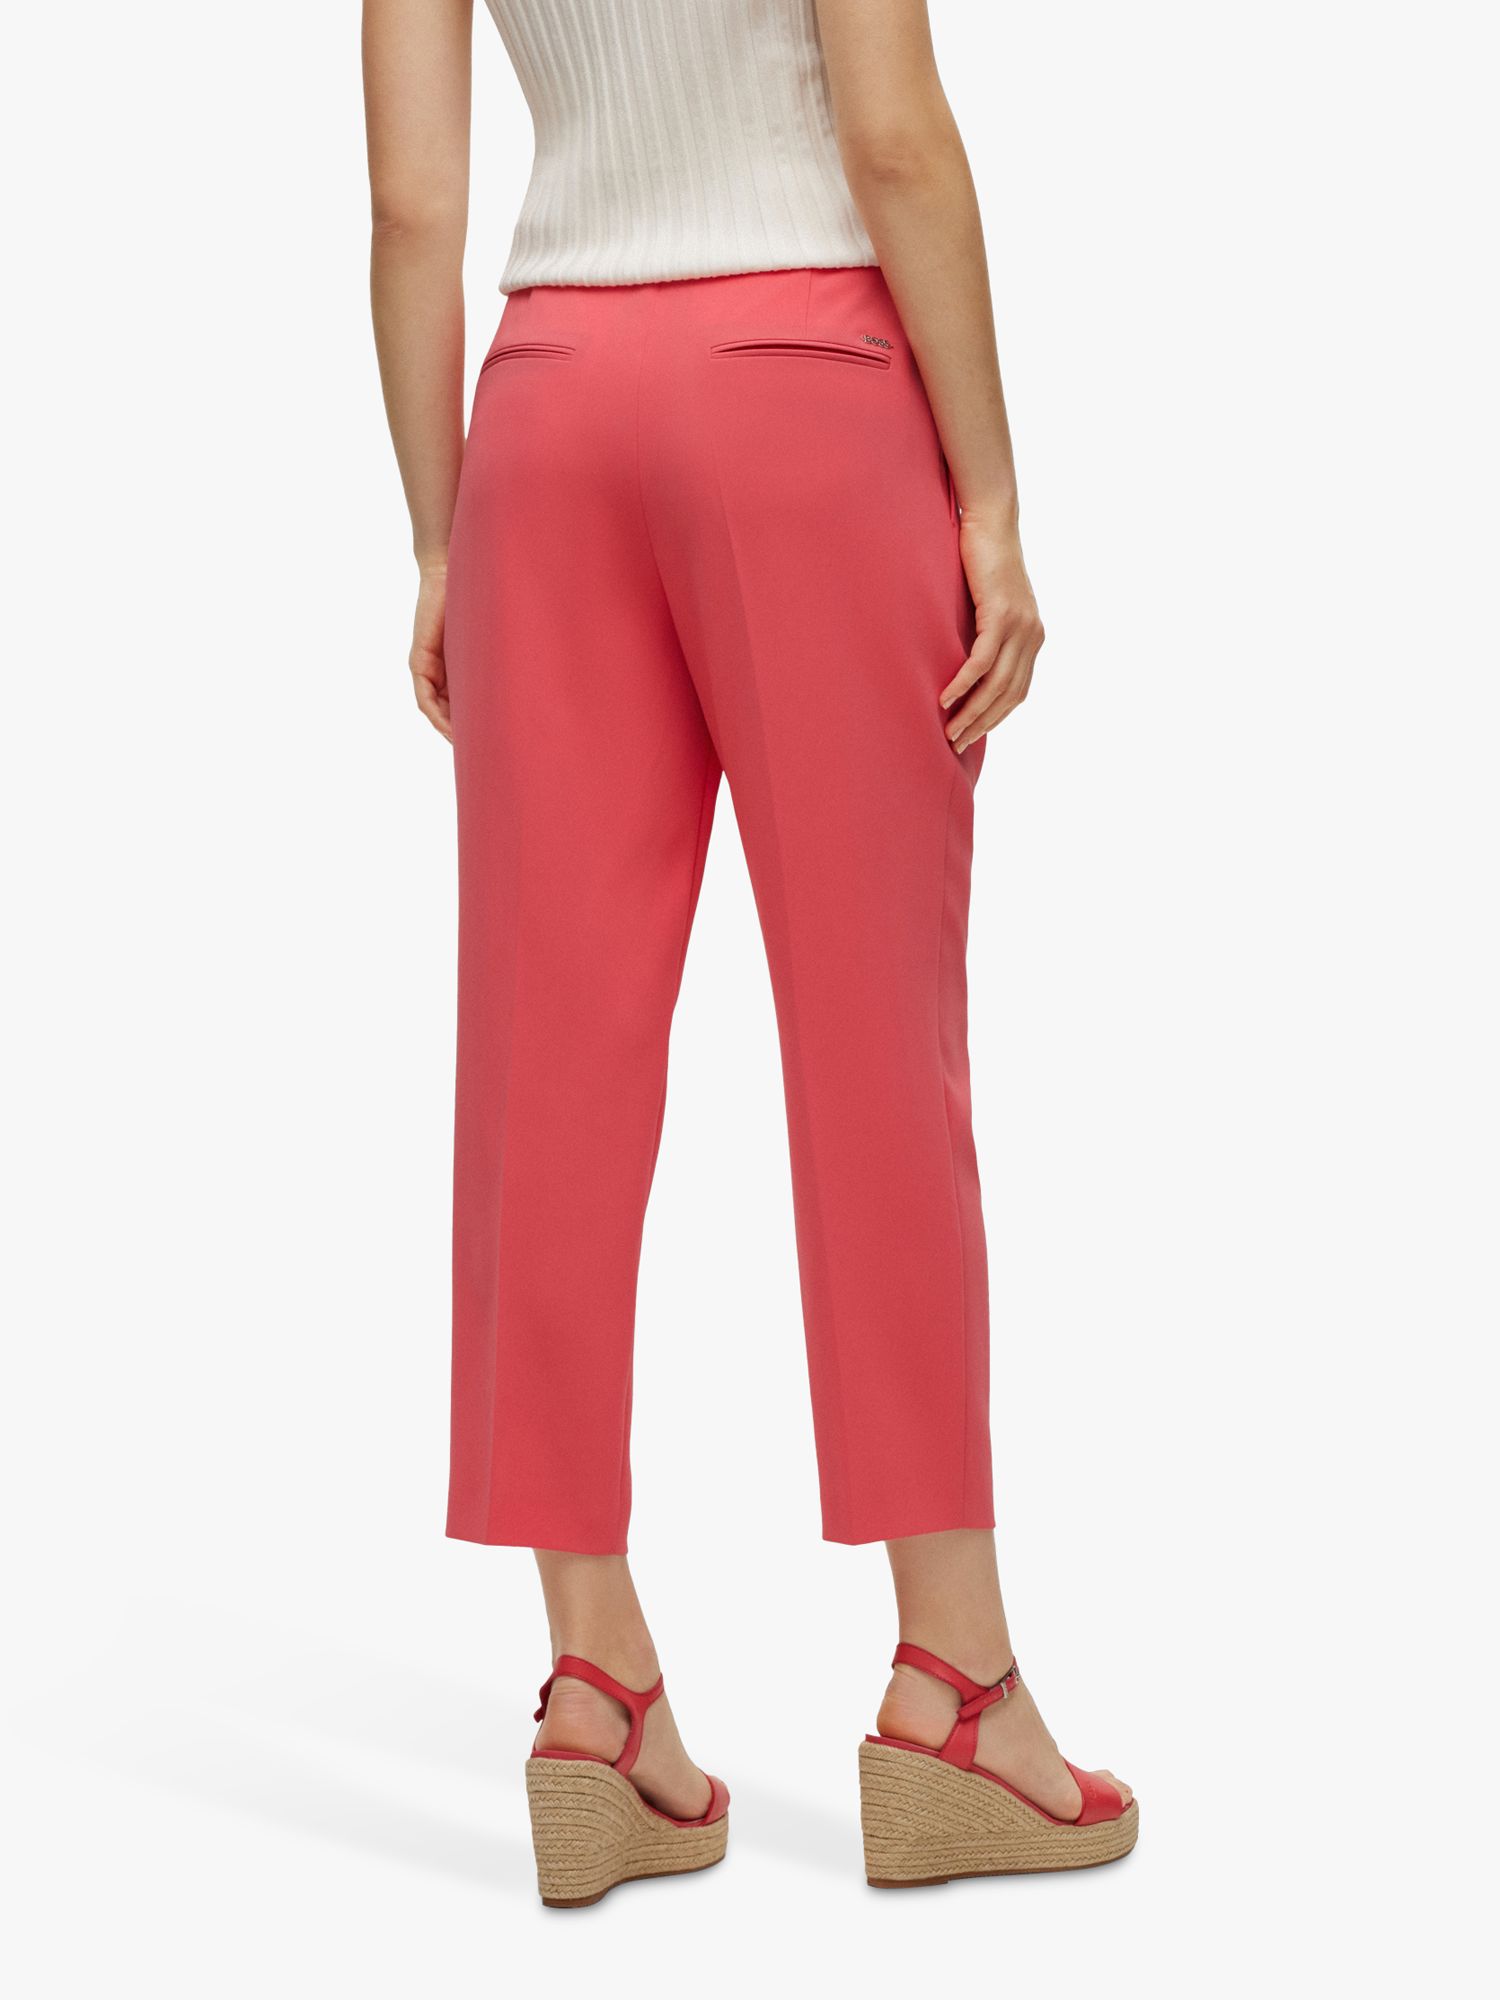 BOSS Tapia Cropped Trousers, Bright Pink at John Lewis & Partners